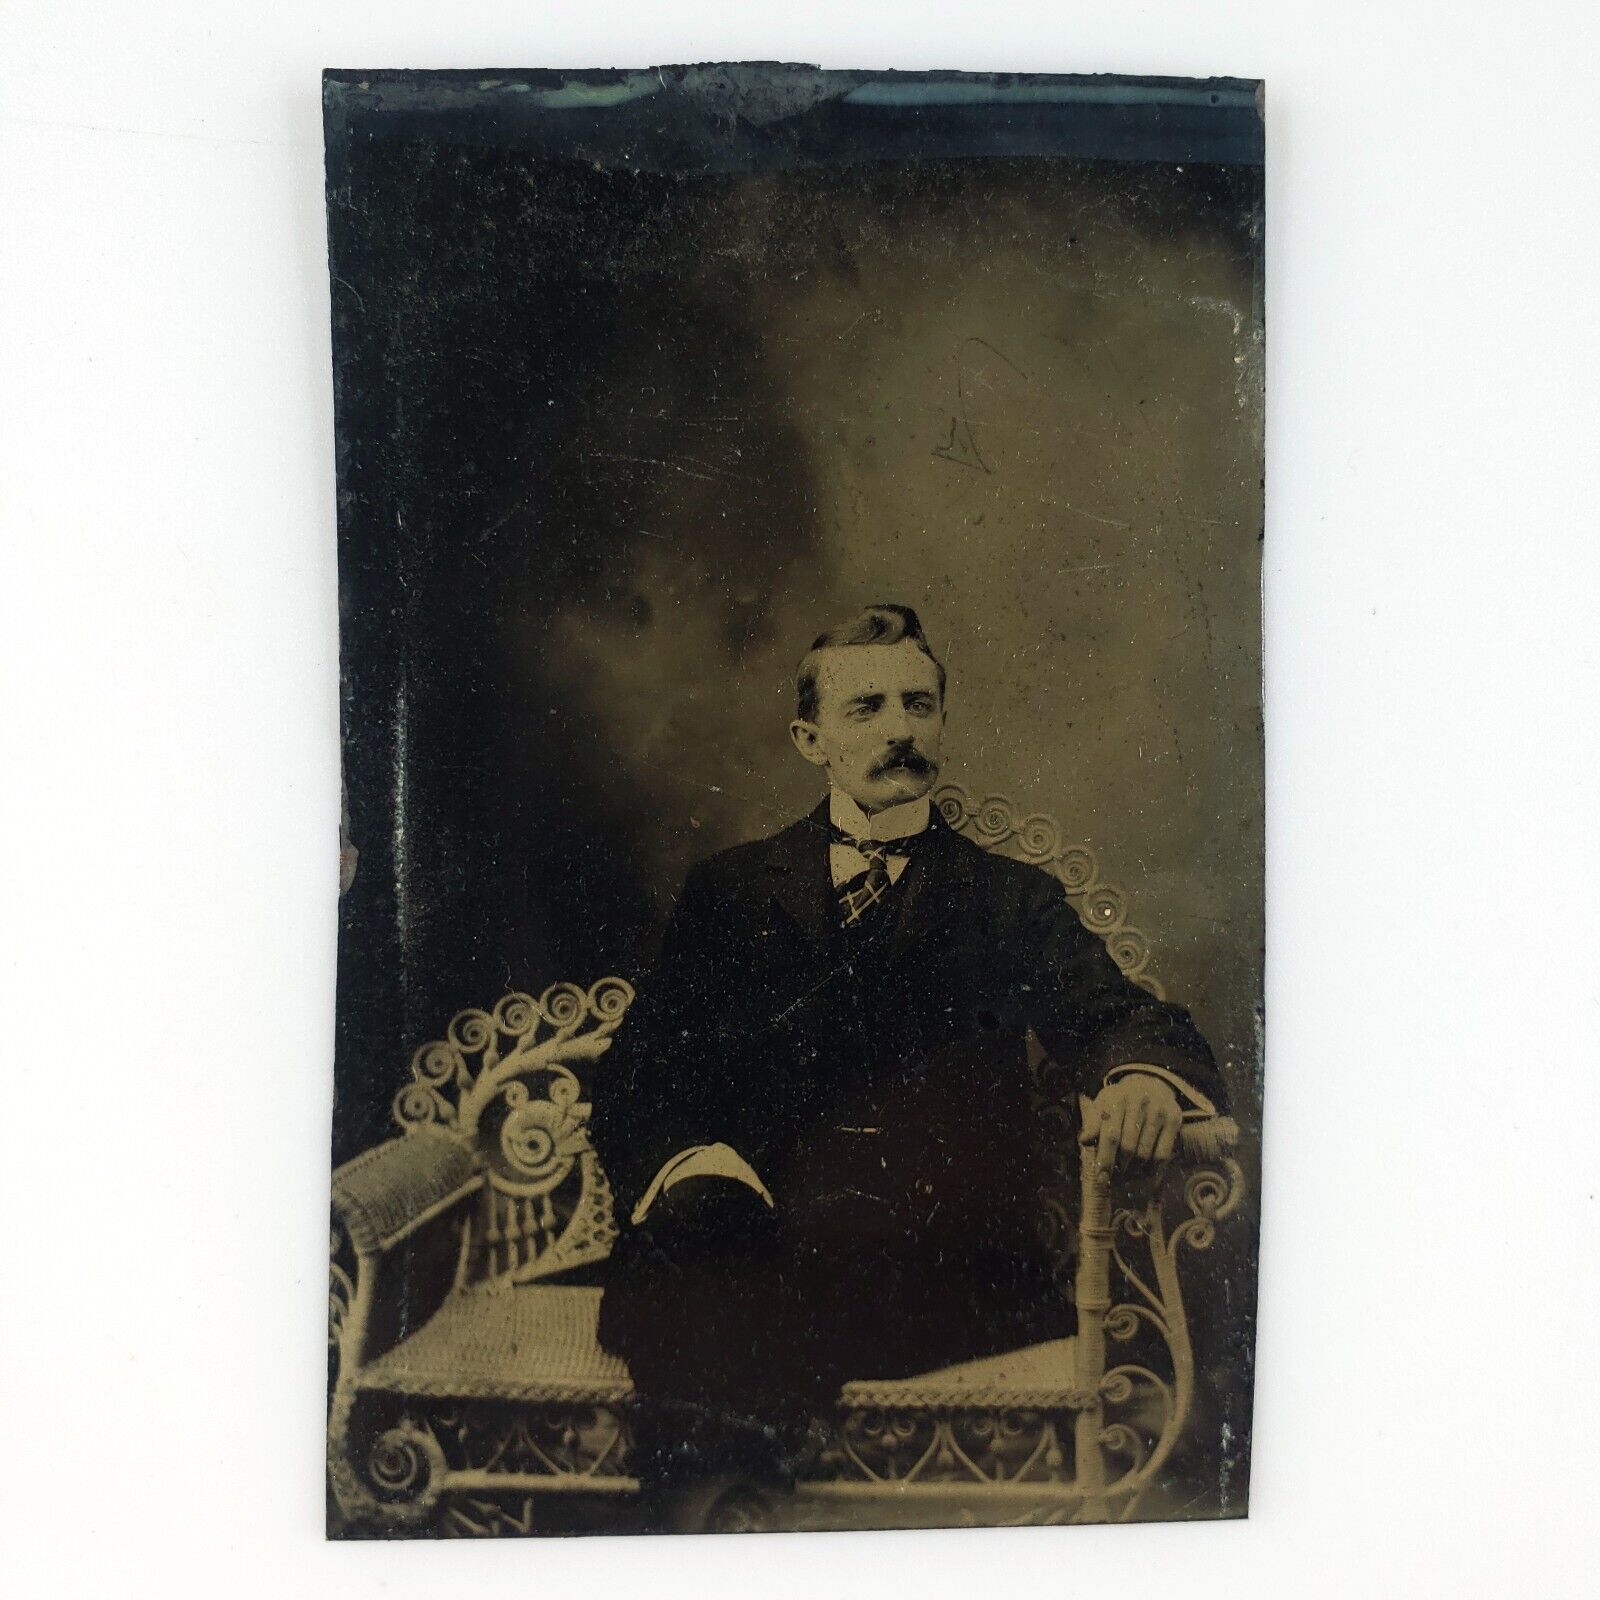 Wicker Bench Amputee Man Tintype c1870 Antique 1/6 Plate Mustache Photo A3727